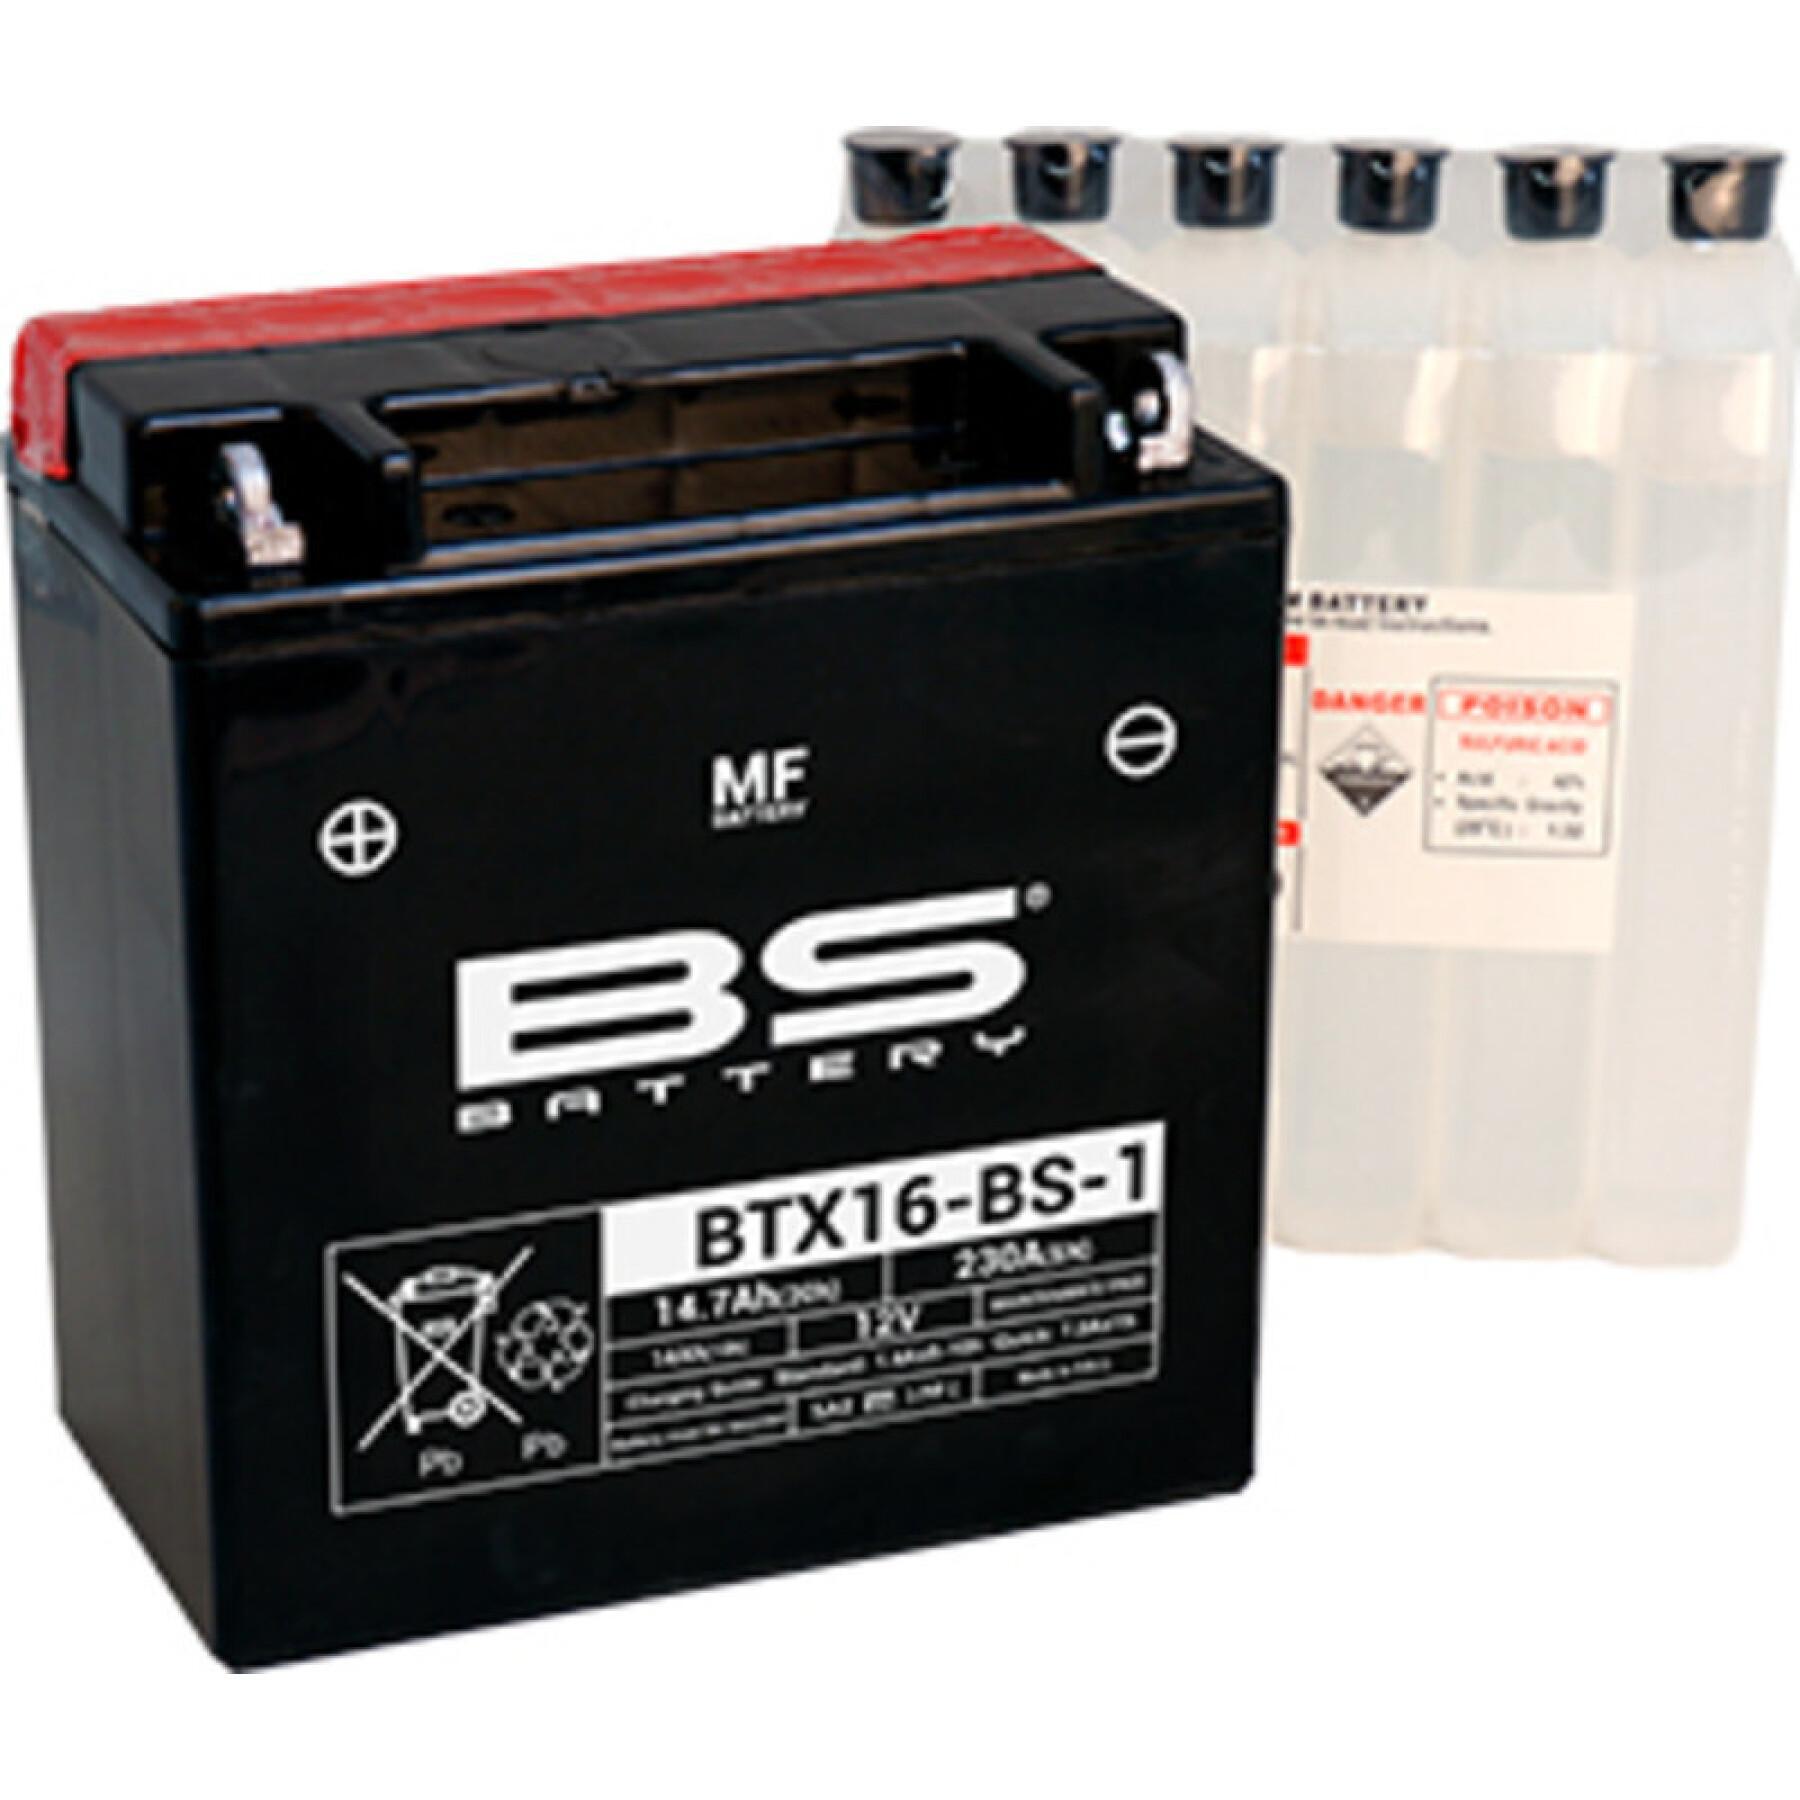 Factory-activated motorcycle battery BS Battery BTX16